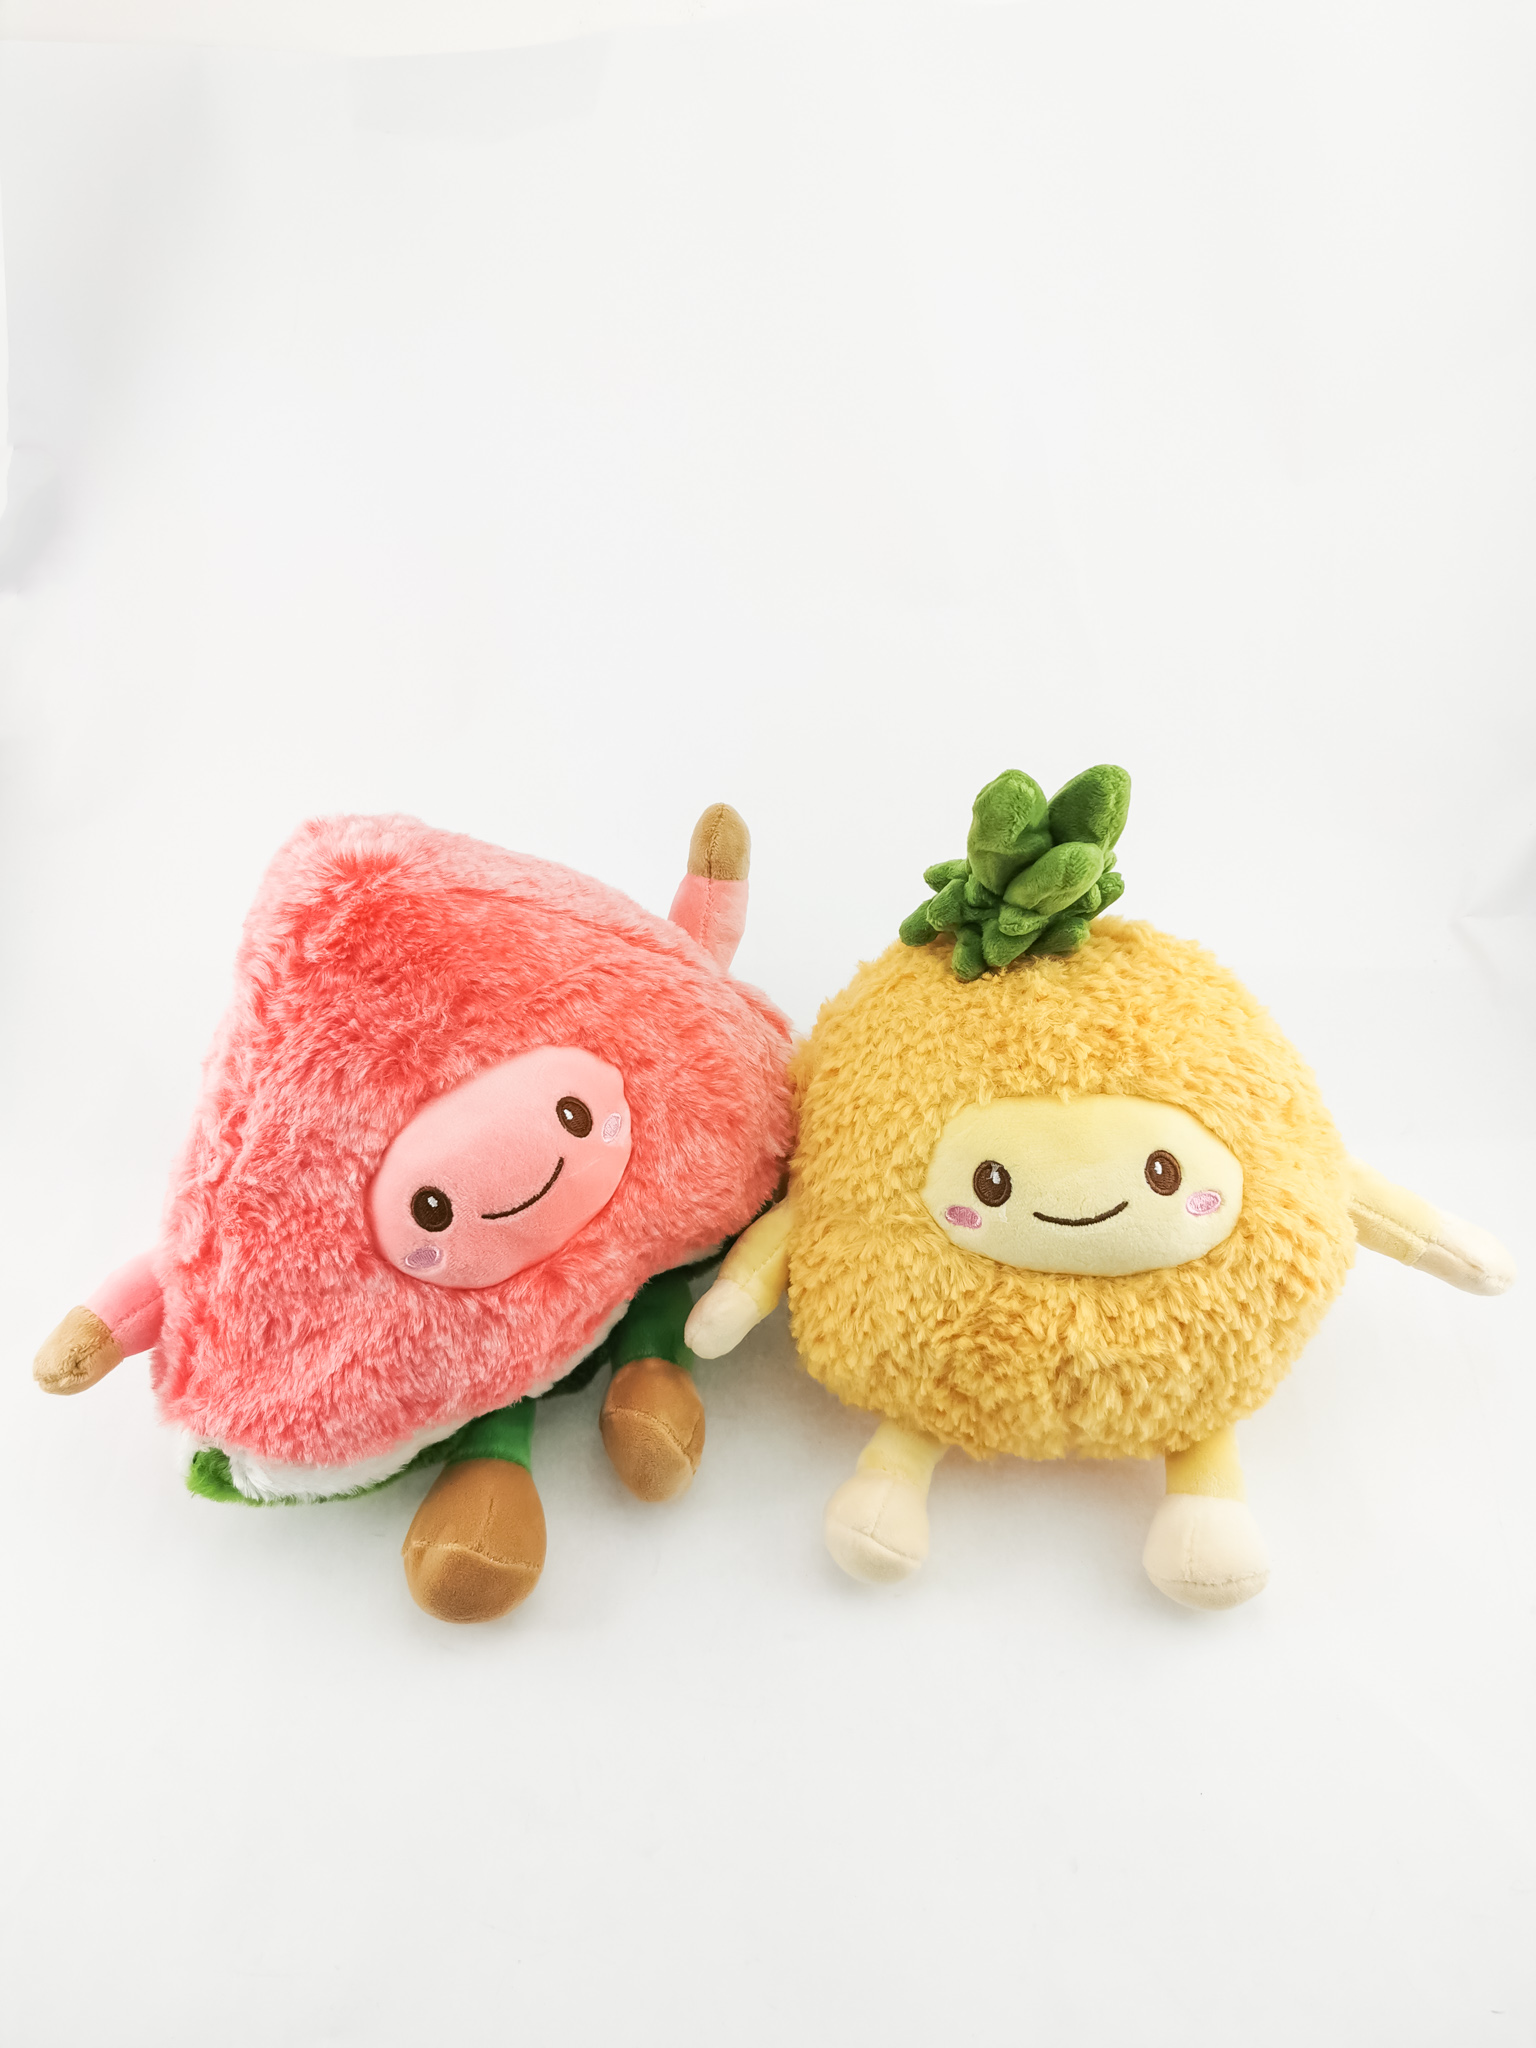 Fruit Plush Toy/ Pillow - Pineapple - Gifts by Art Tree